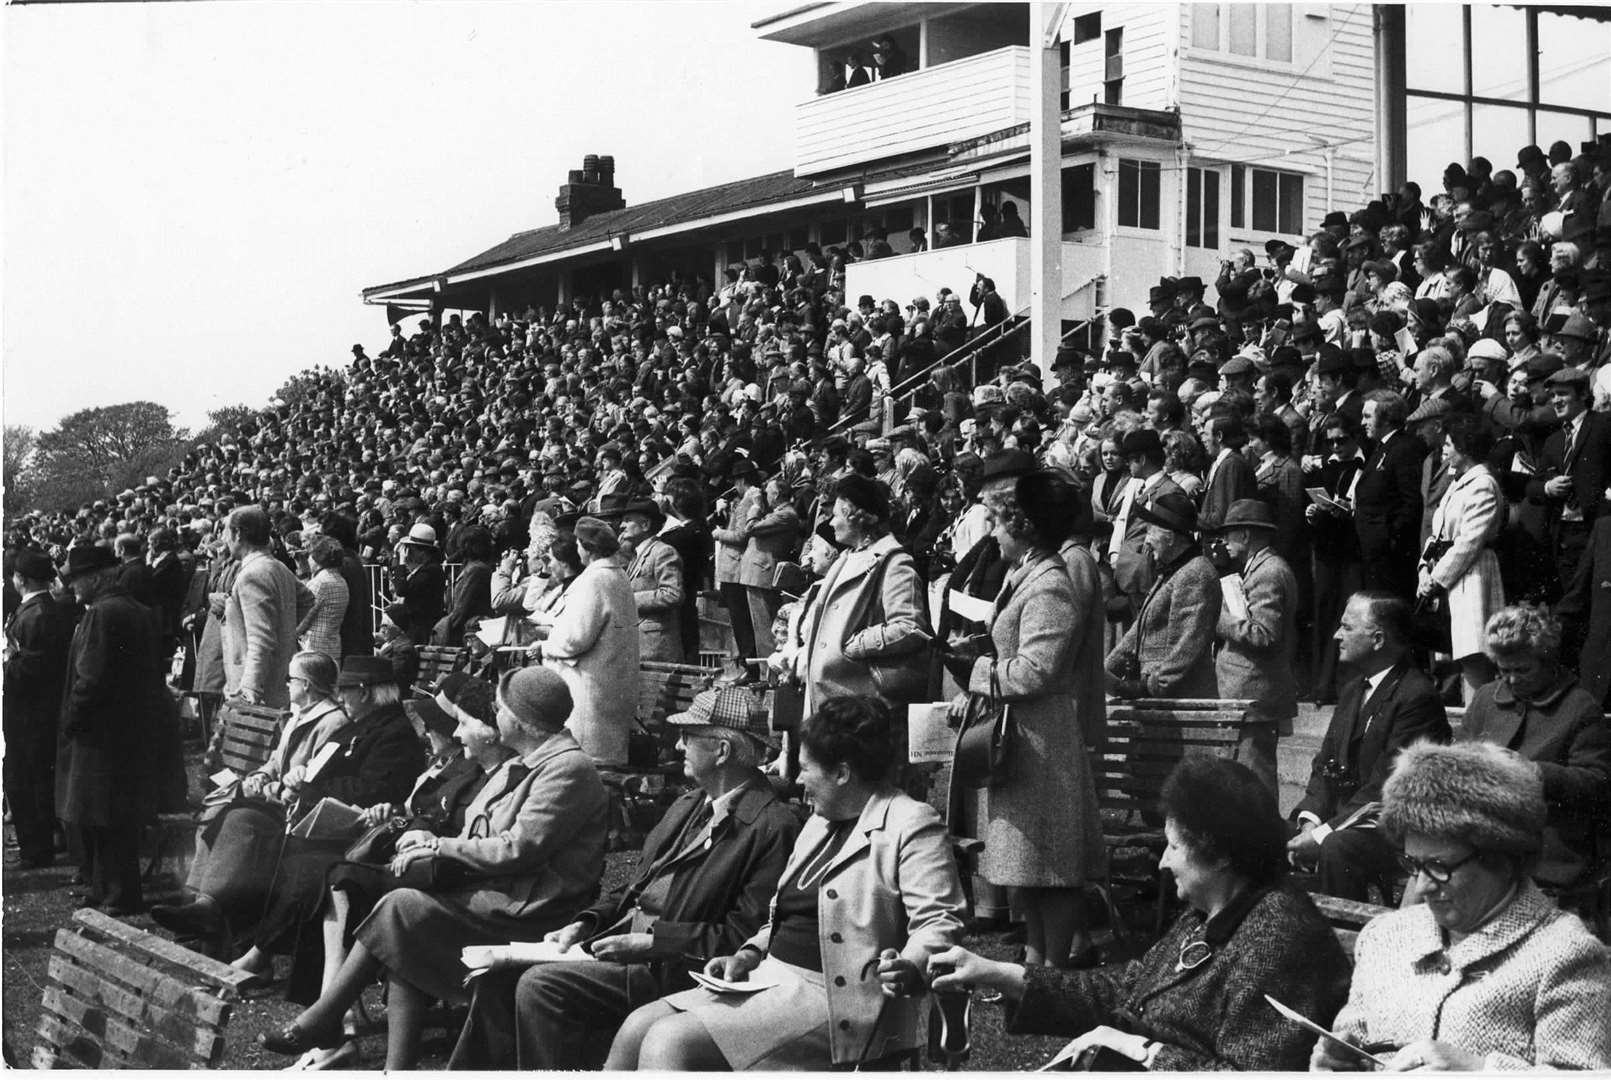 Folkestone Racecourse is packed to the rafters back in the day